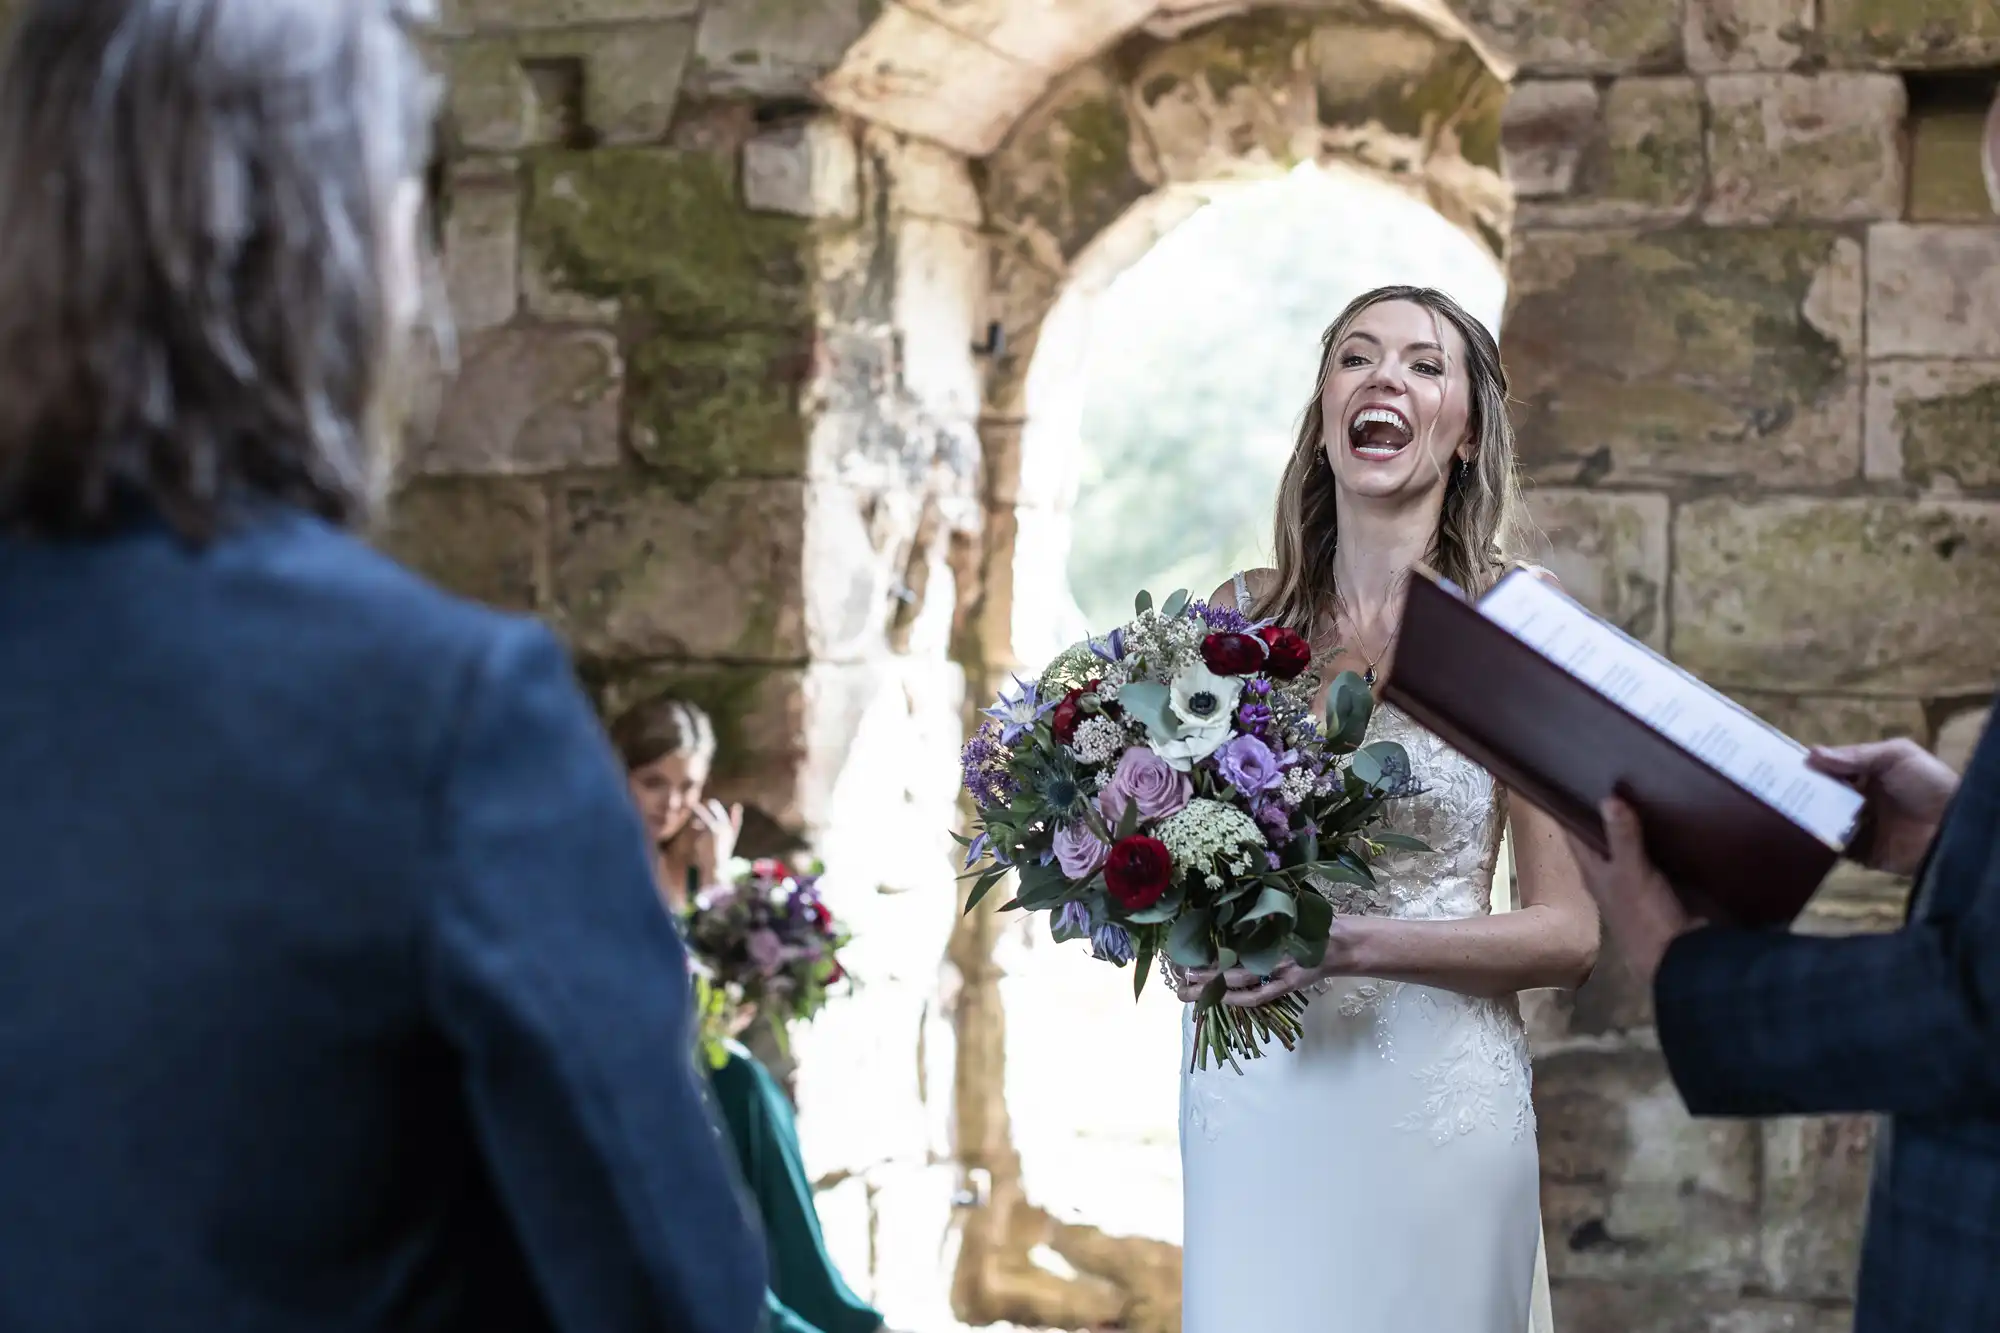 A bride holding a bouquet is laughing during a wedding ceremony in an old stone building with a large archway. Two other people are partially visible, one reading from a book.